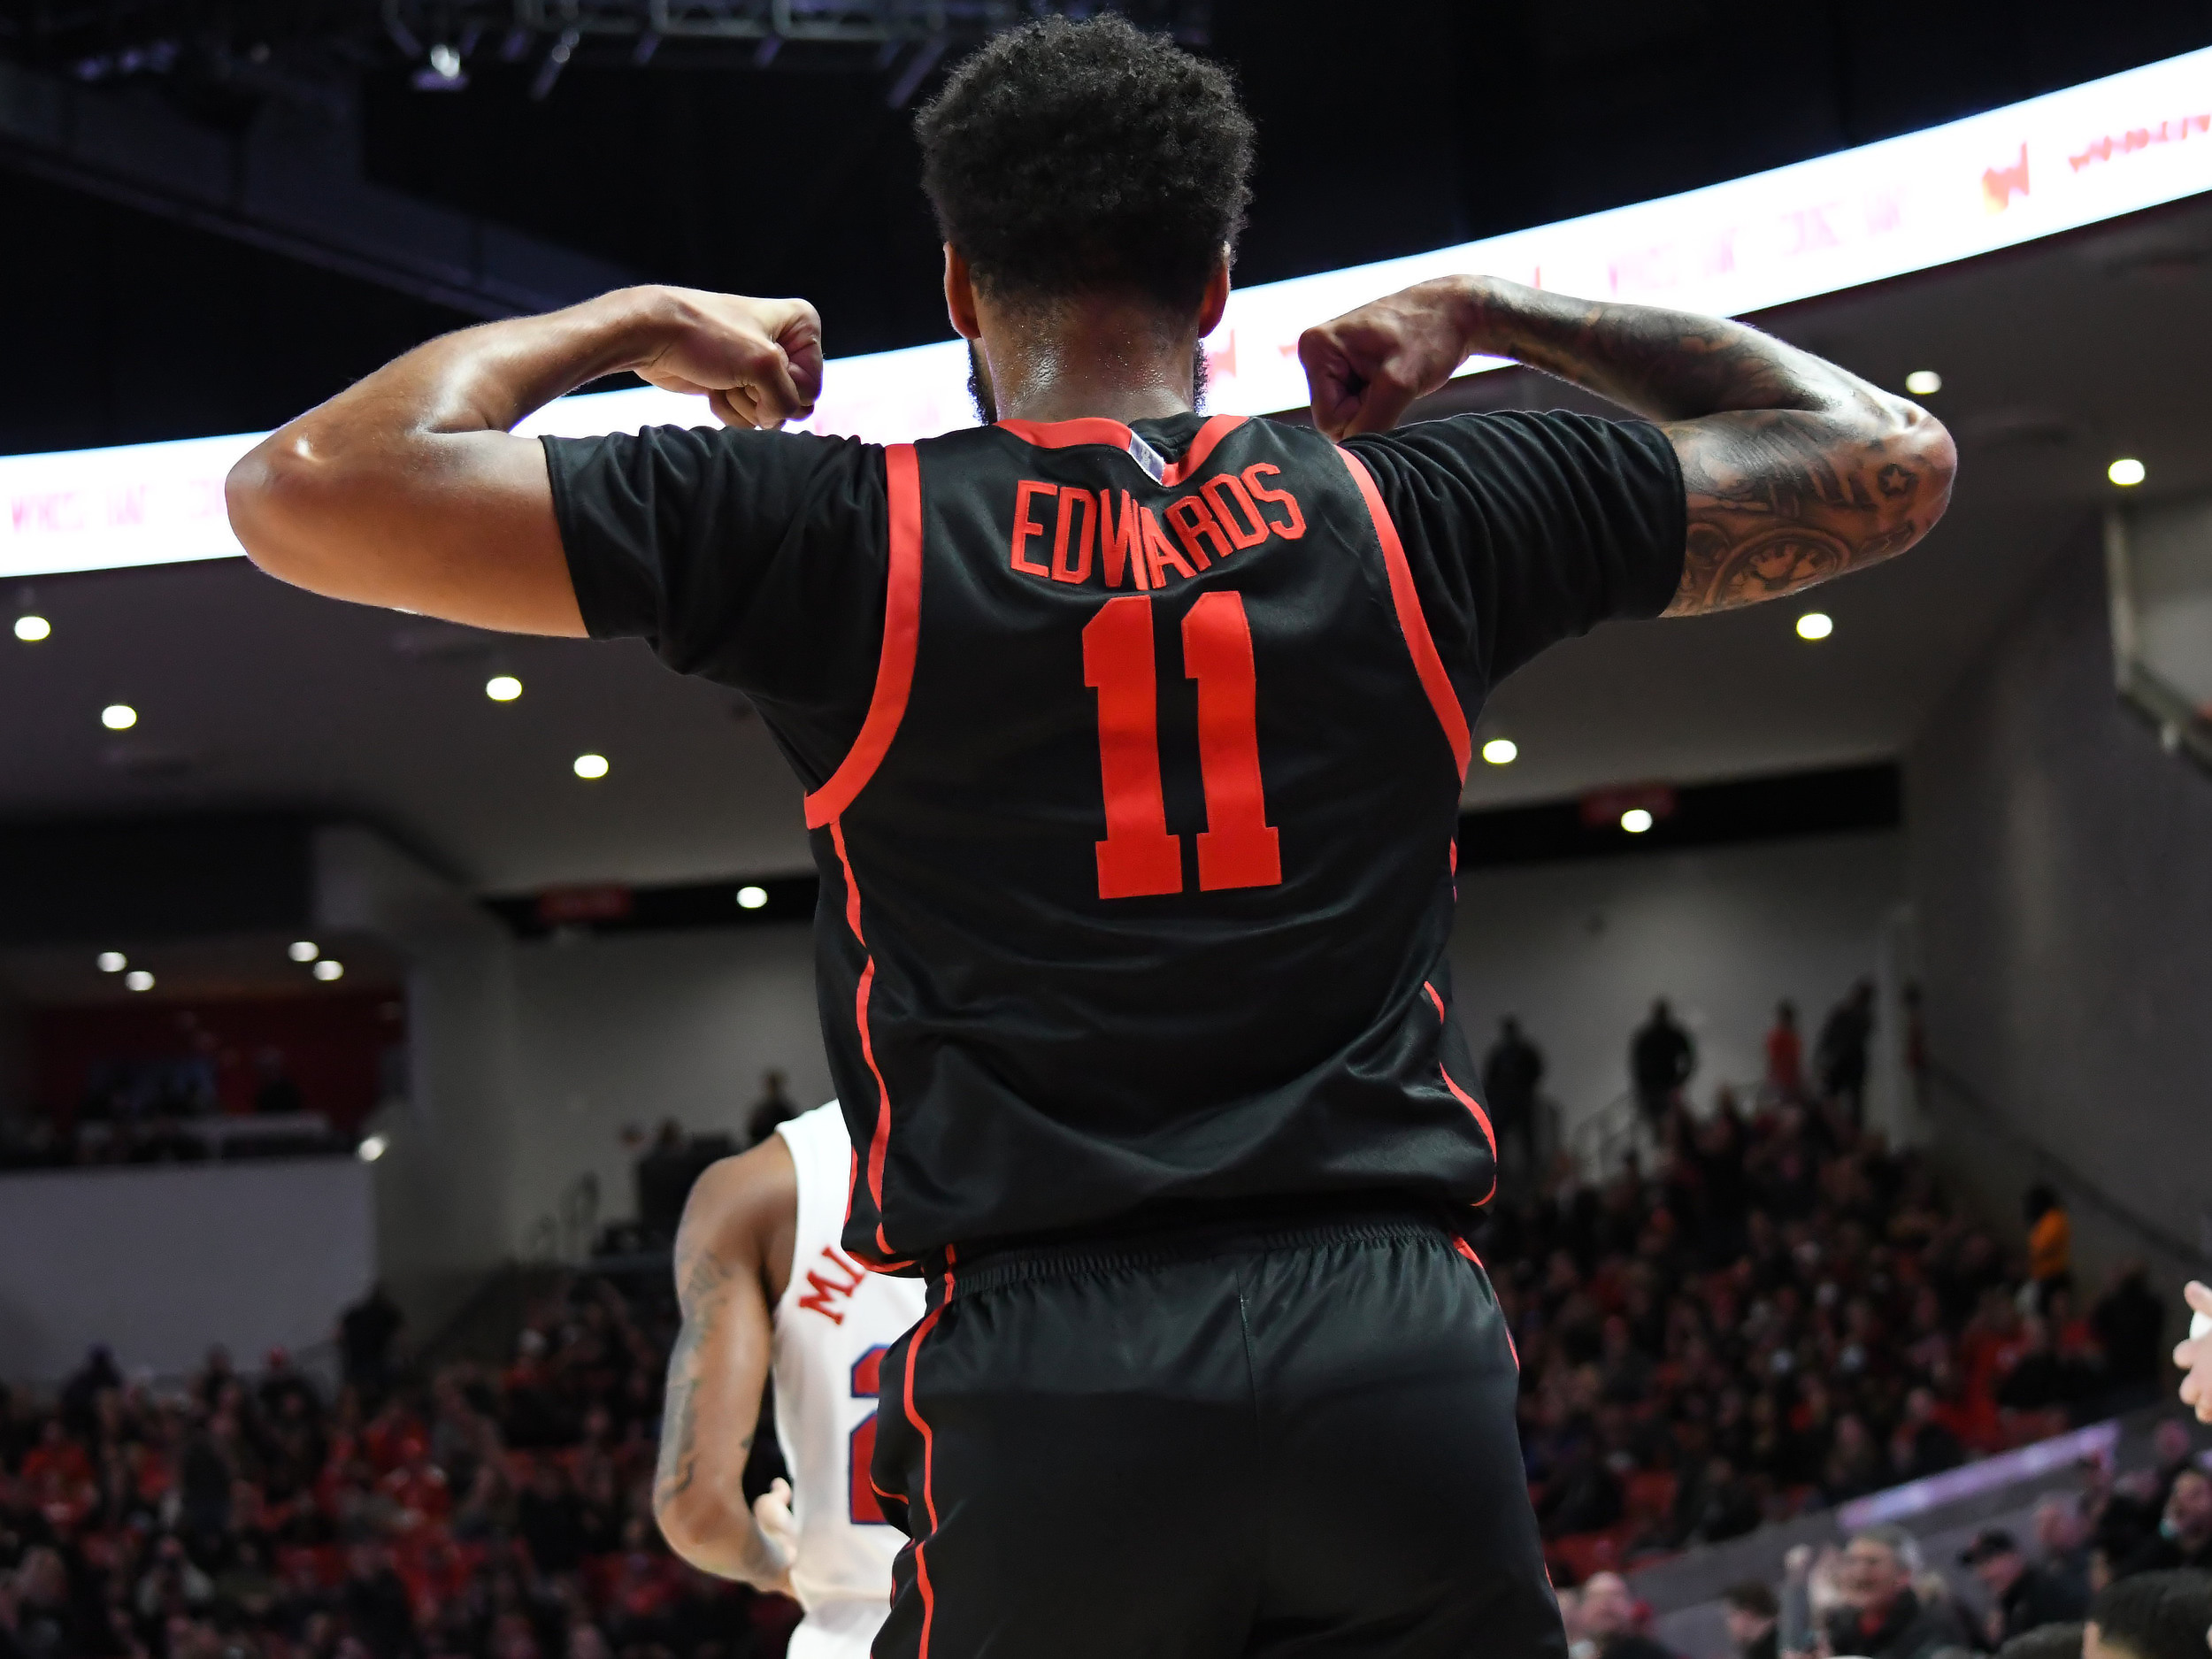 UH guard Kyler Edwards flexes after converting a layup through contact in the first half of the Cougars' victory over SMU on Sunday afternoon at Fertitta Center. | Steven Paultanis/The Cougar